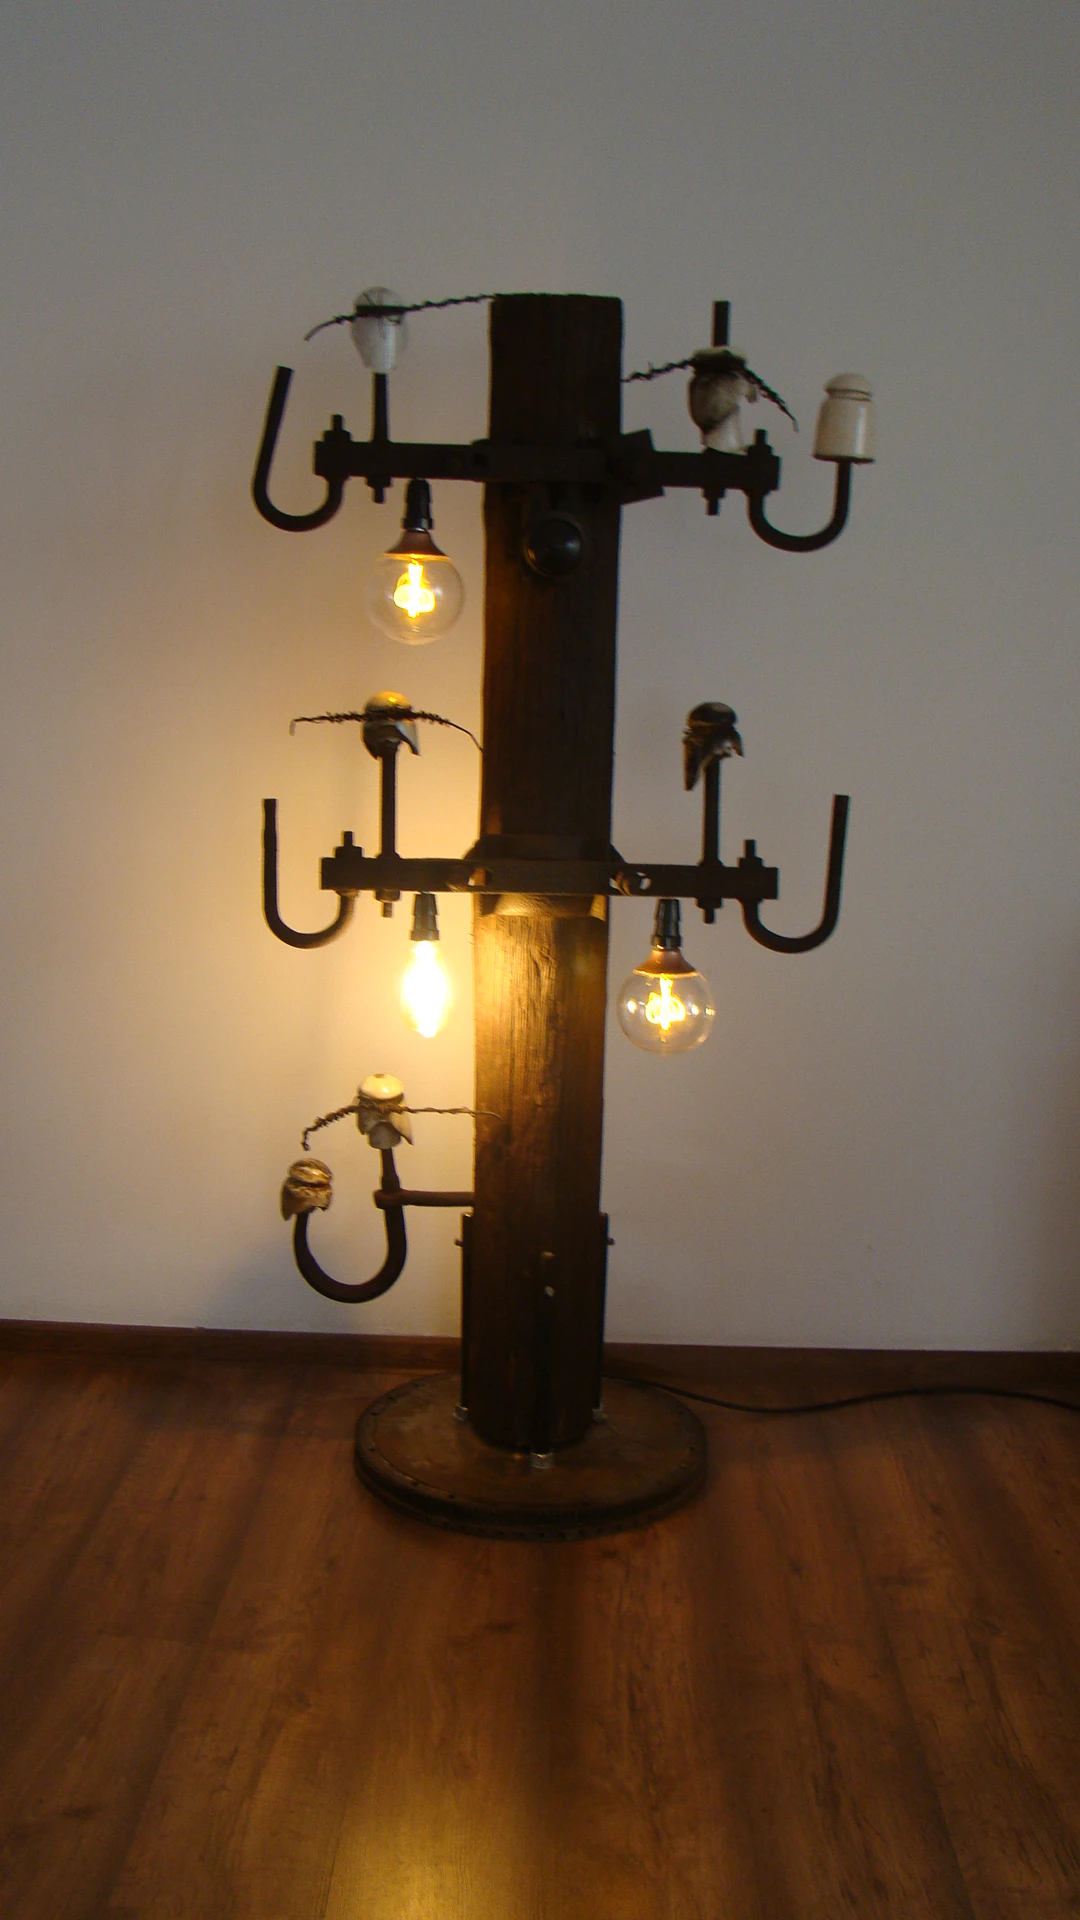 Projekc: Lamp: old electricity mast - 170cm for loft bar or club